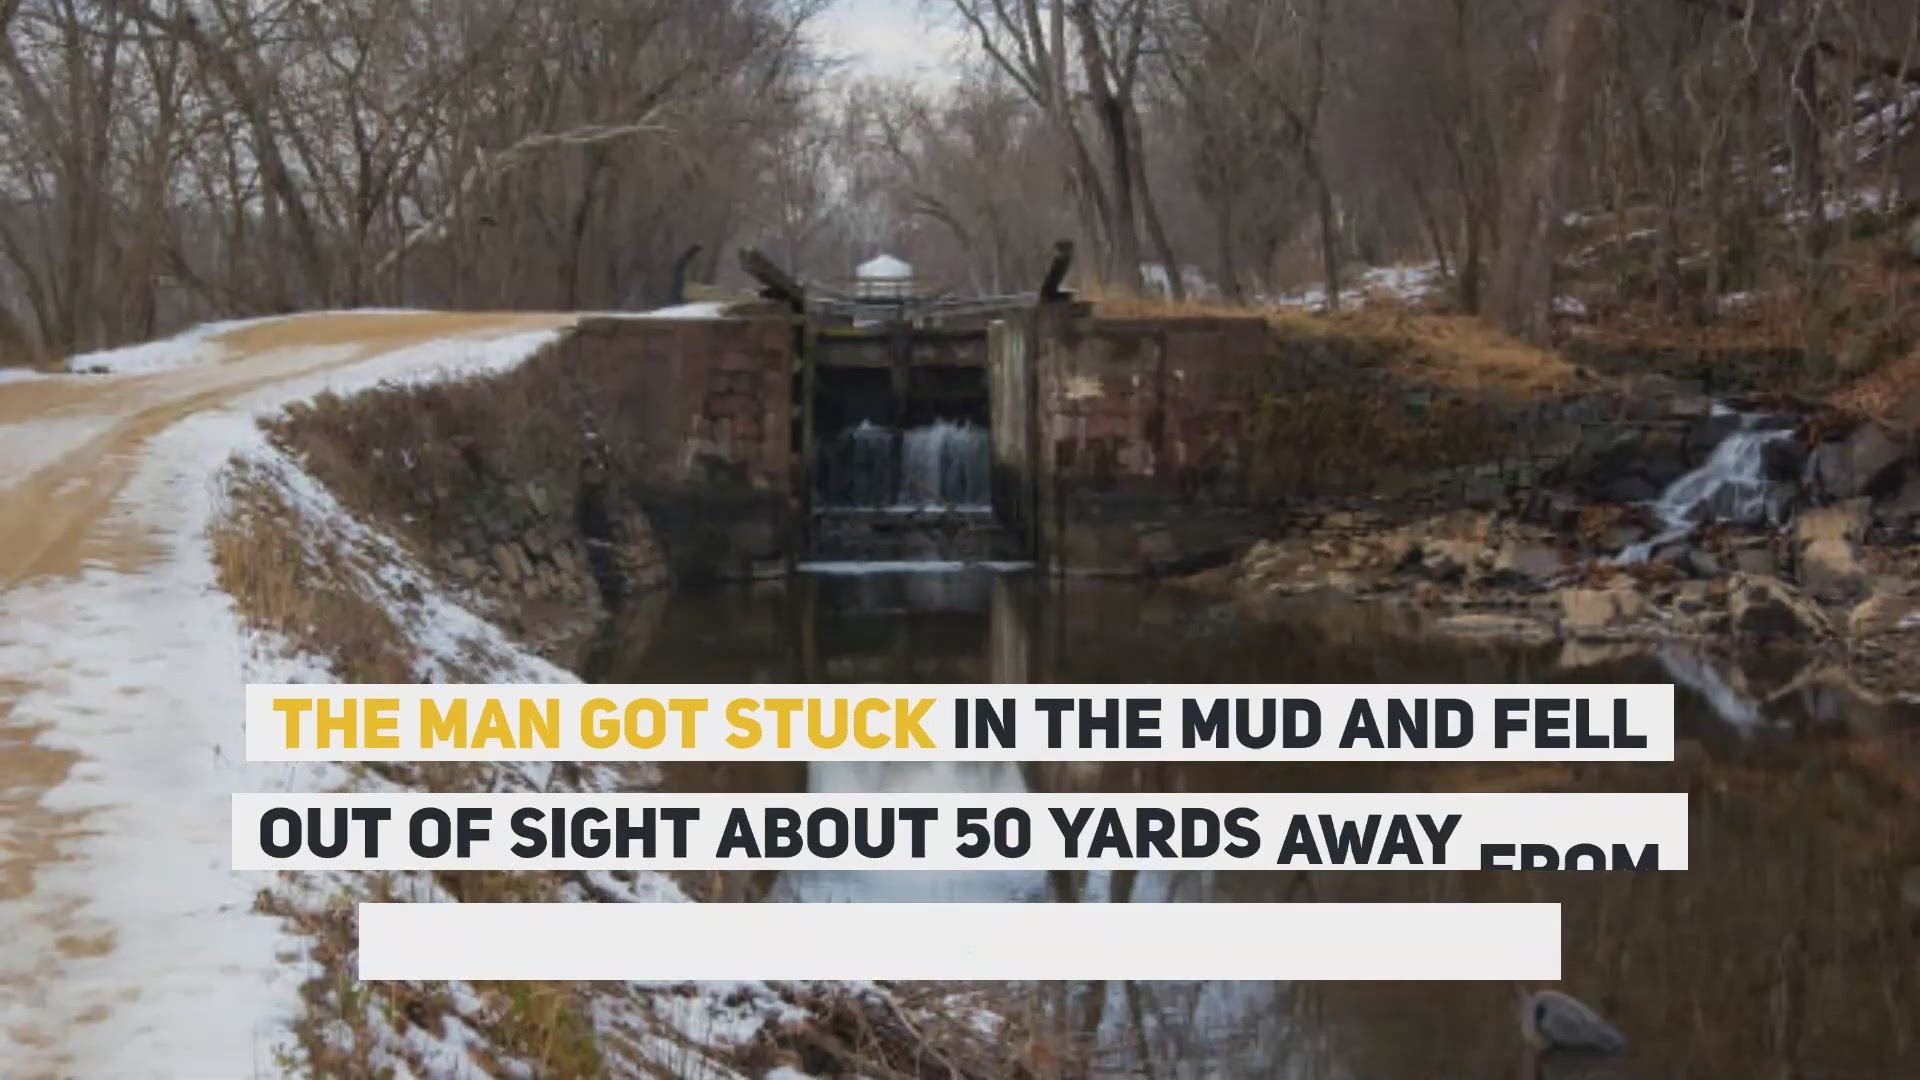 Two barking dogs helped save a man who was helplessly stuck in the mud near the Potomac River in Montgomery County, Md., rescuers said. The man got stuck in the mud and fell out of sight about 50 yards away from the Chesapeake and Ohio (C&O) Canal towpath.